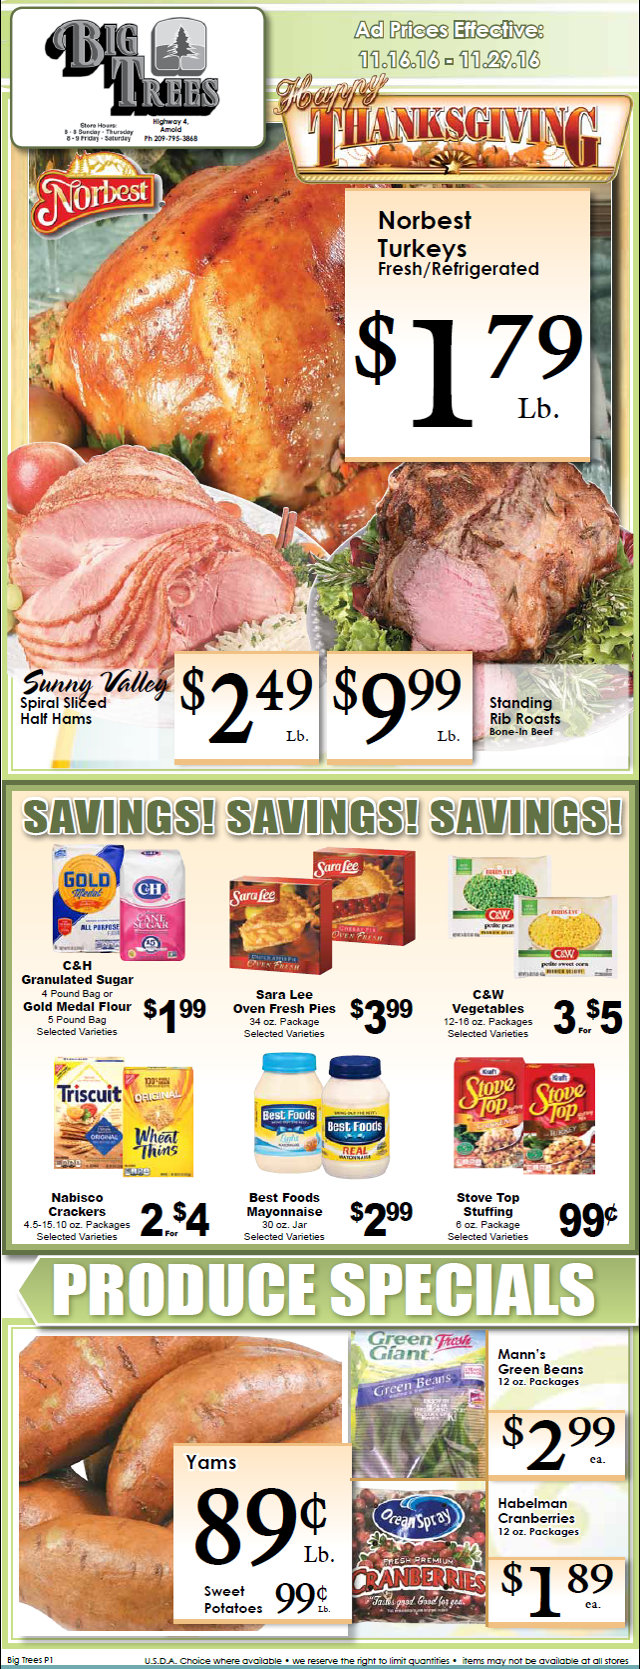 Big Trees Market Weekly Ad & Specials Through November 29th!  Shop Local For Your Thanksgiving Feast!!